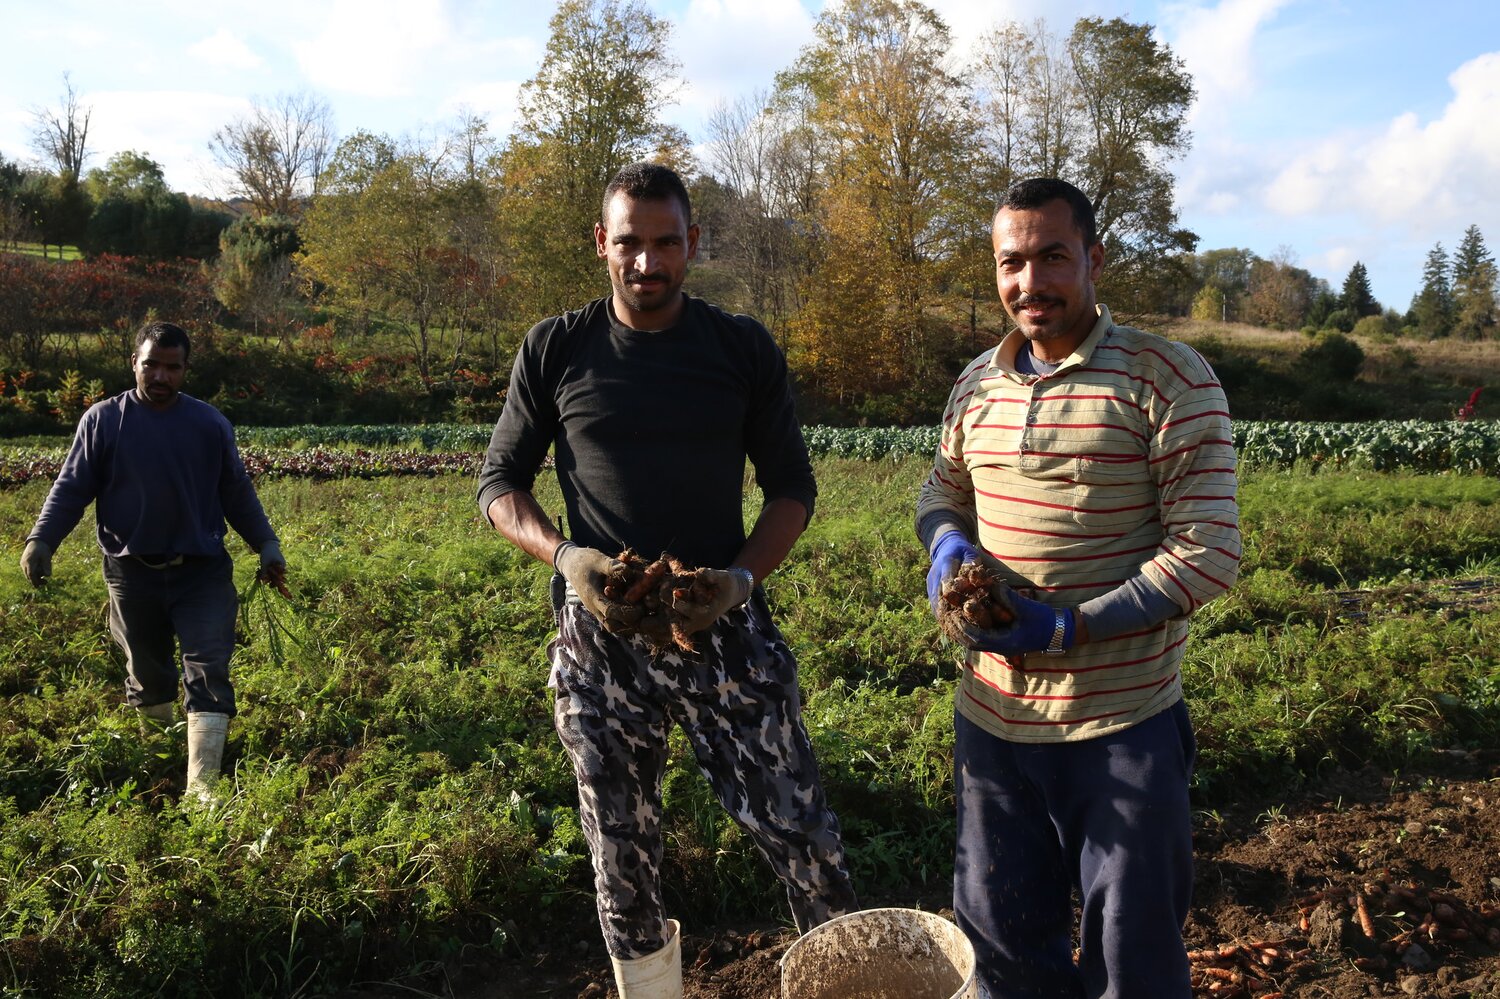 Egyptian farm workers at Norwich Meadows Farm. Farmer Zaid Kurdieh enjoys working with Egyptian farmers, as they are often used to making use of limited spaces. Photo: Crop Trust/Luis Salazar